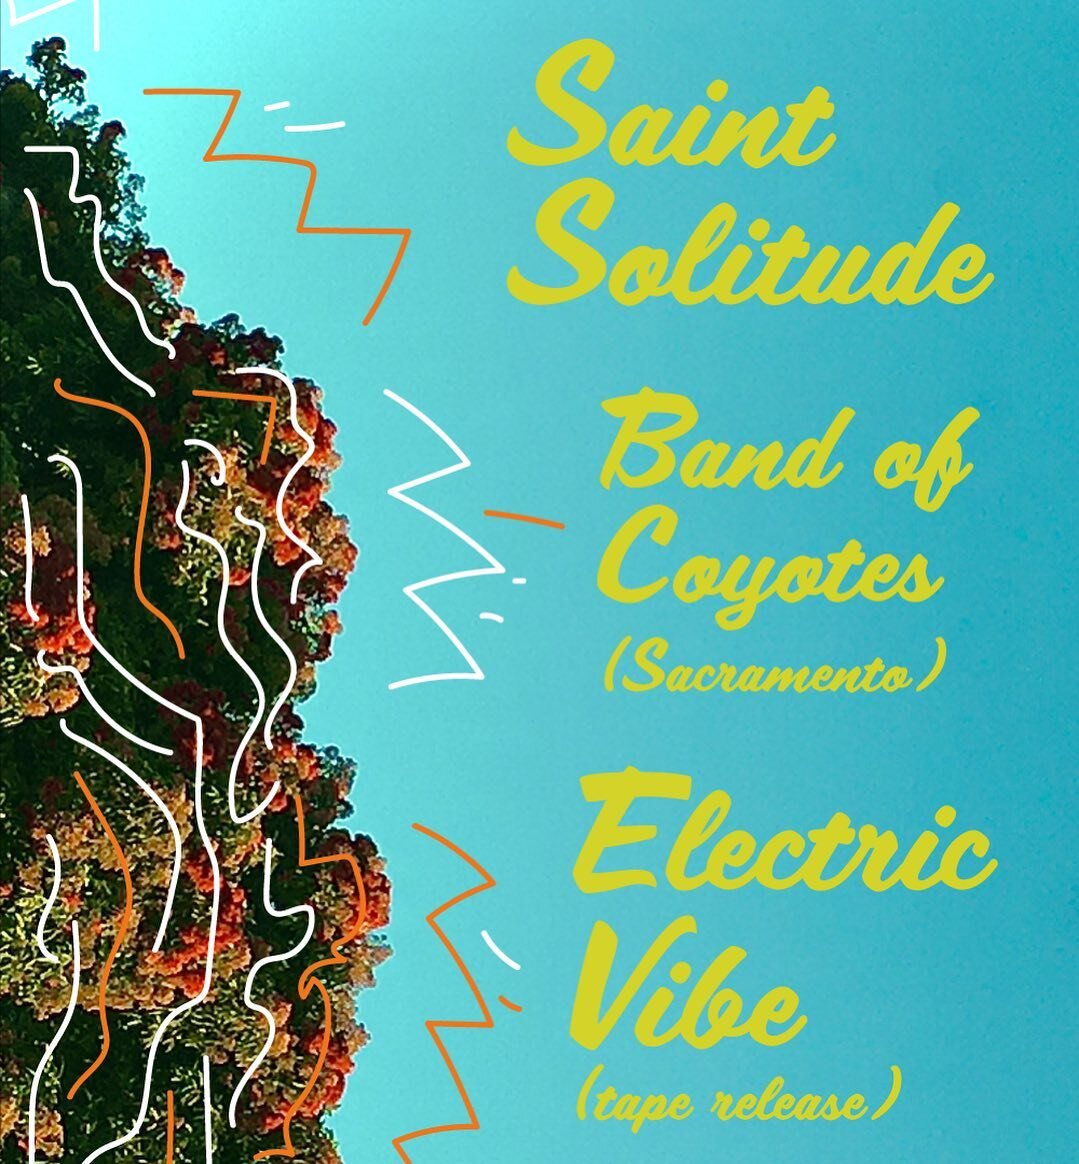 Get your kicks this weekend as we prep for hibernatory needs - aka it&rsquo;s our last band show for the foreseeable future - at @goldenbulloakland with our buds @bandofcoyotes and new buds @ev_theband. 

After 7yrs in the endless summer of CA I&rsqu